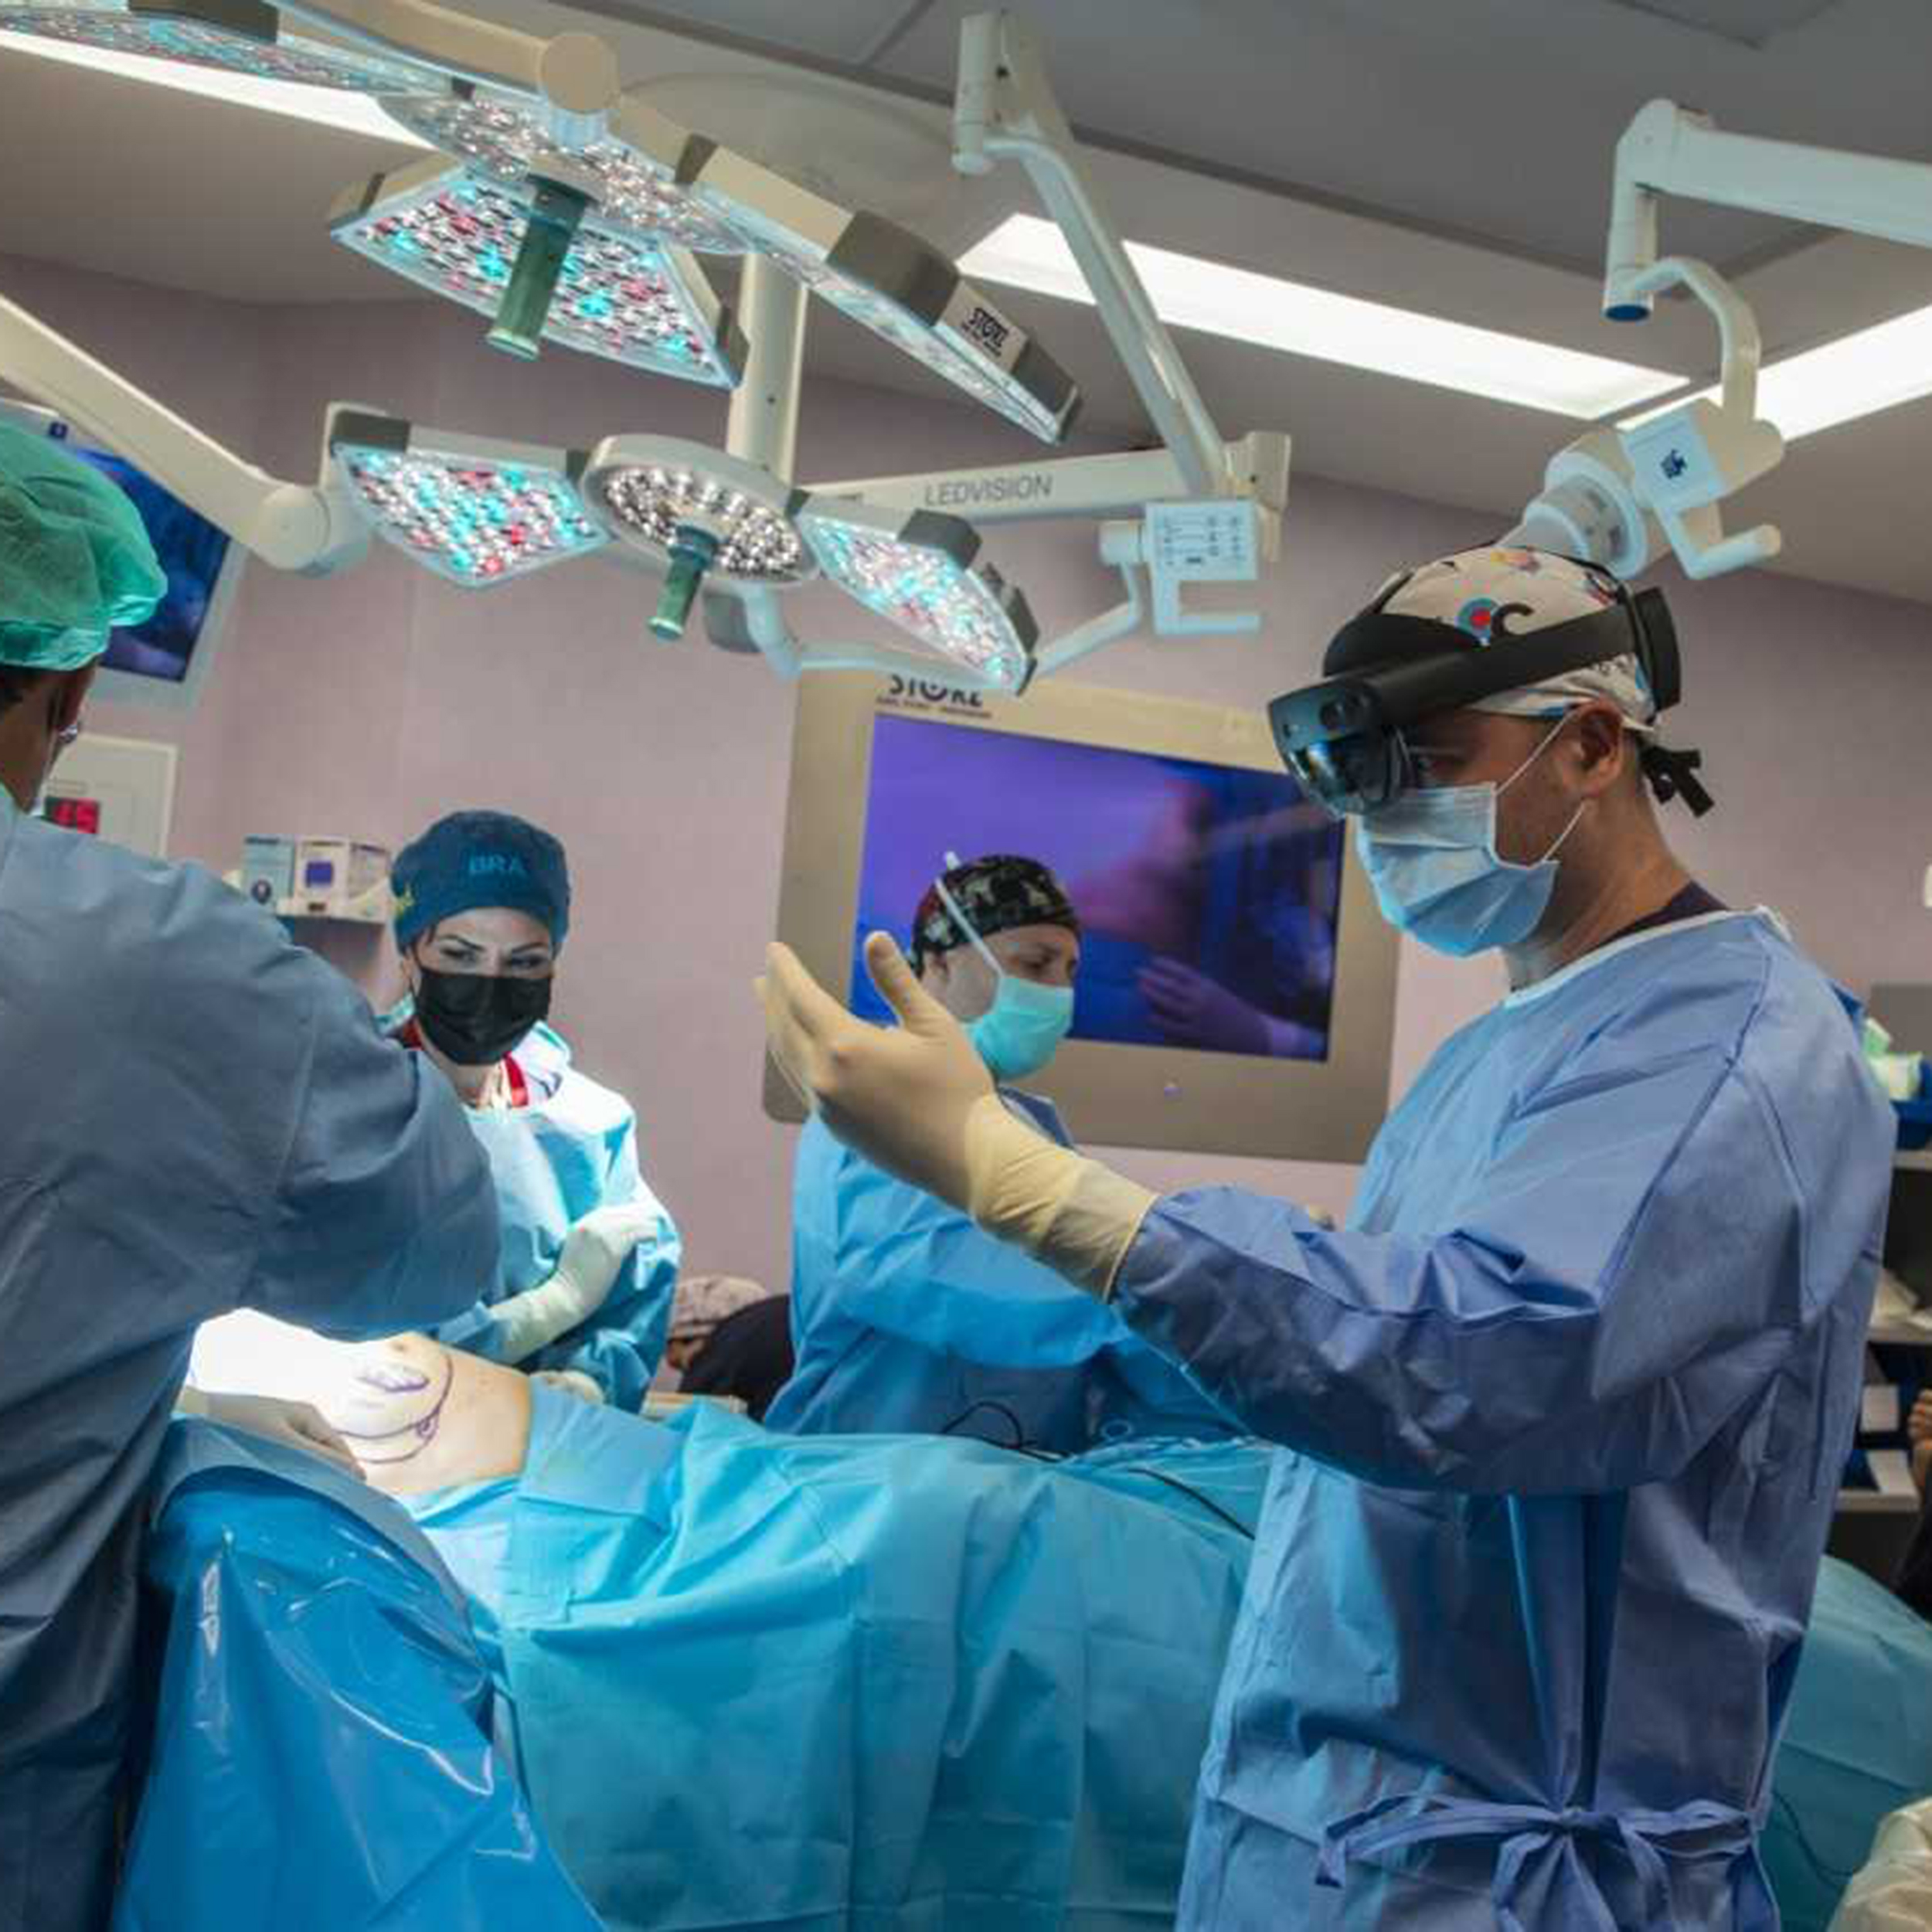 New form of surgical remote supervision takes its first steps